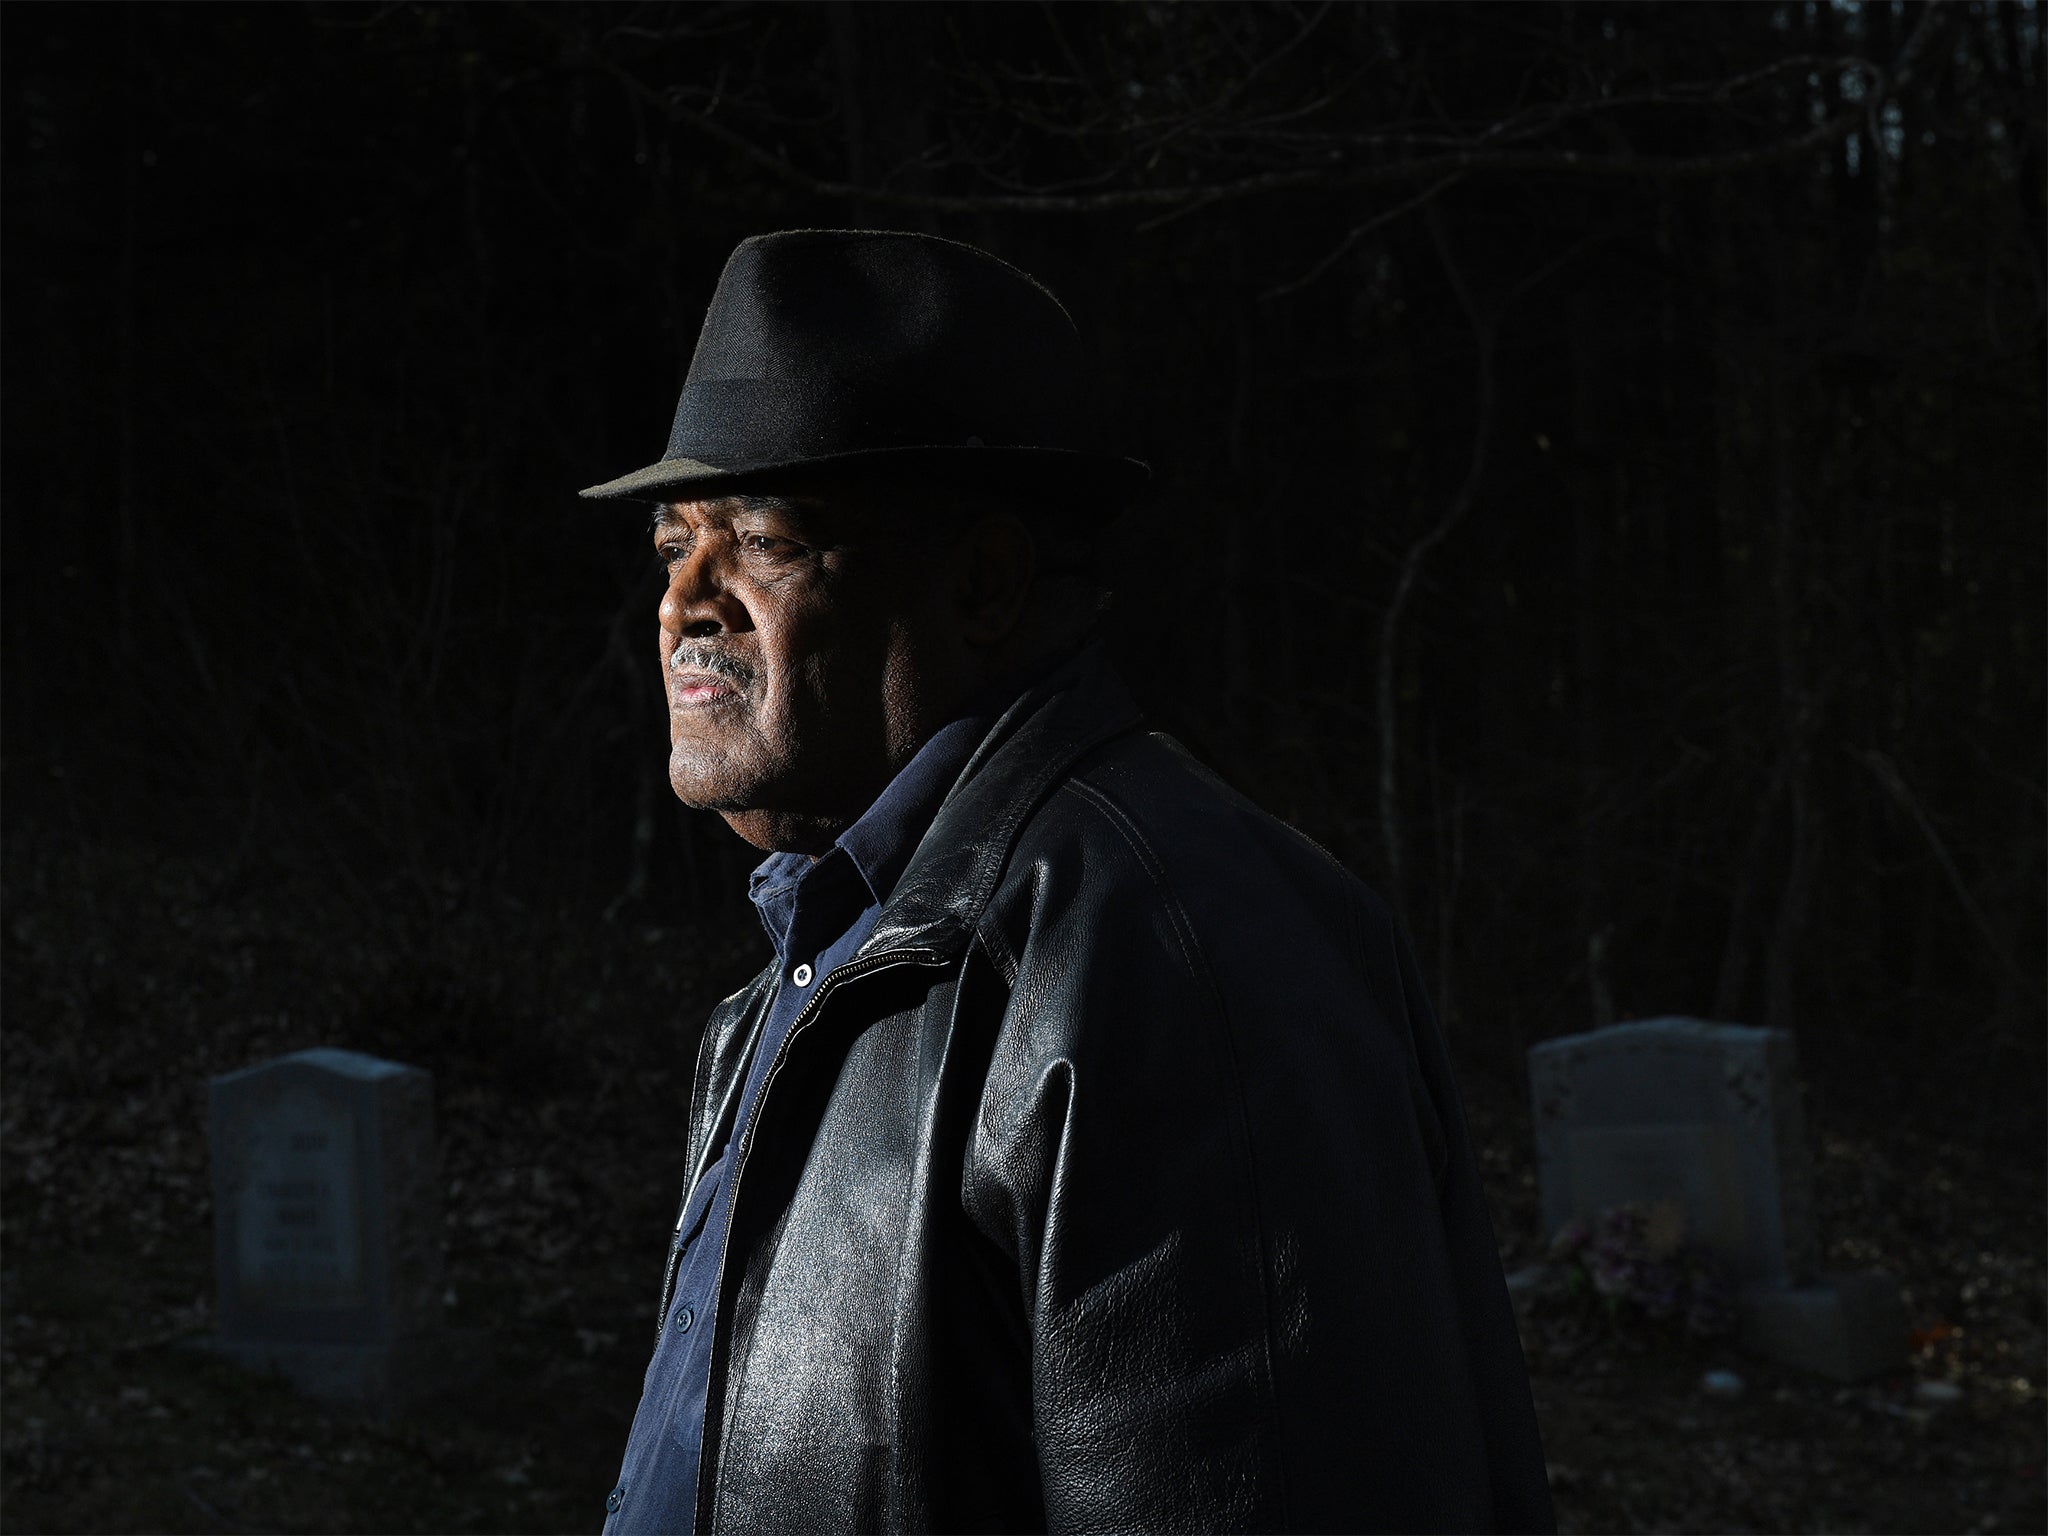 John Johnson at the location of the 1926 lynching: ‘I want them to admit it’